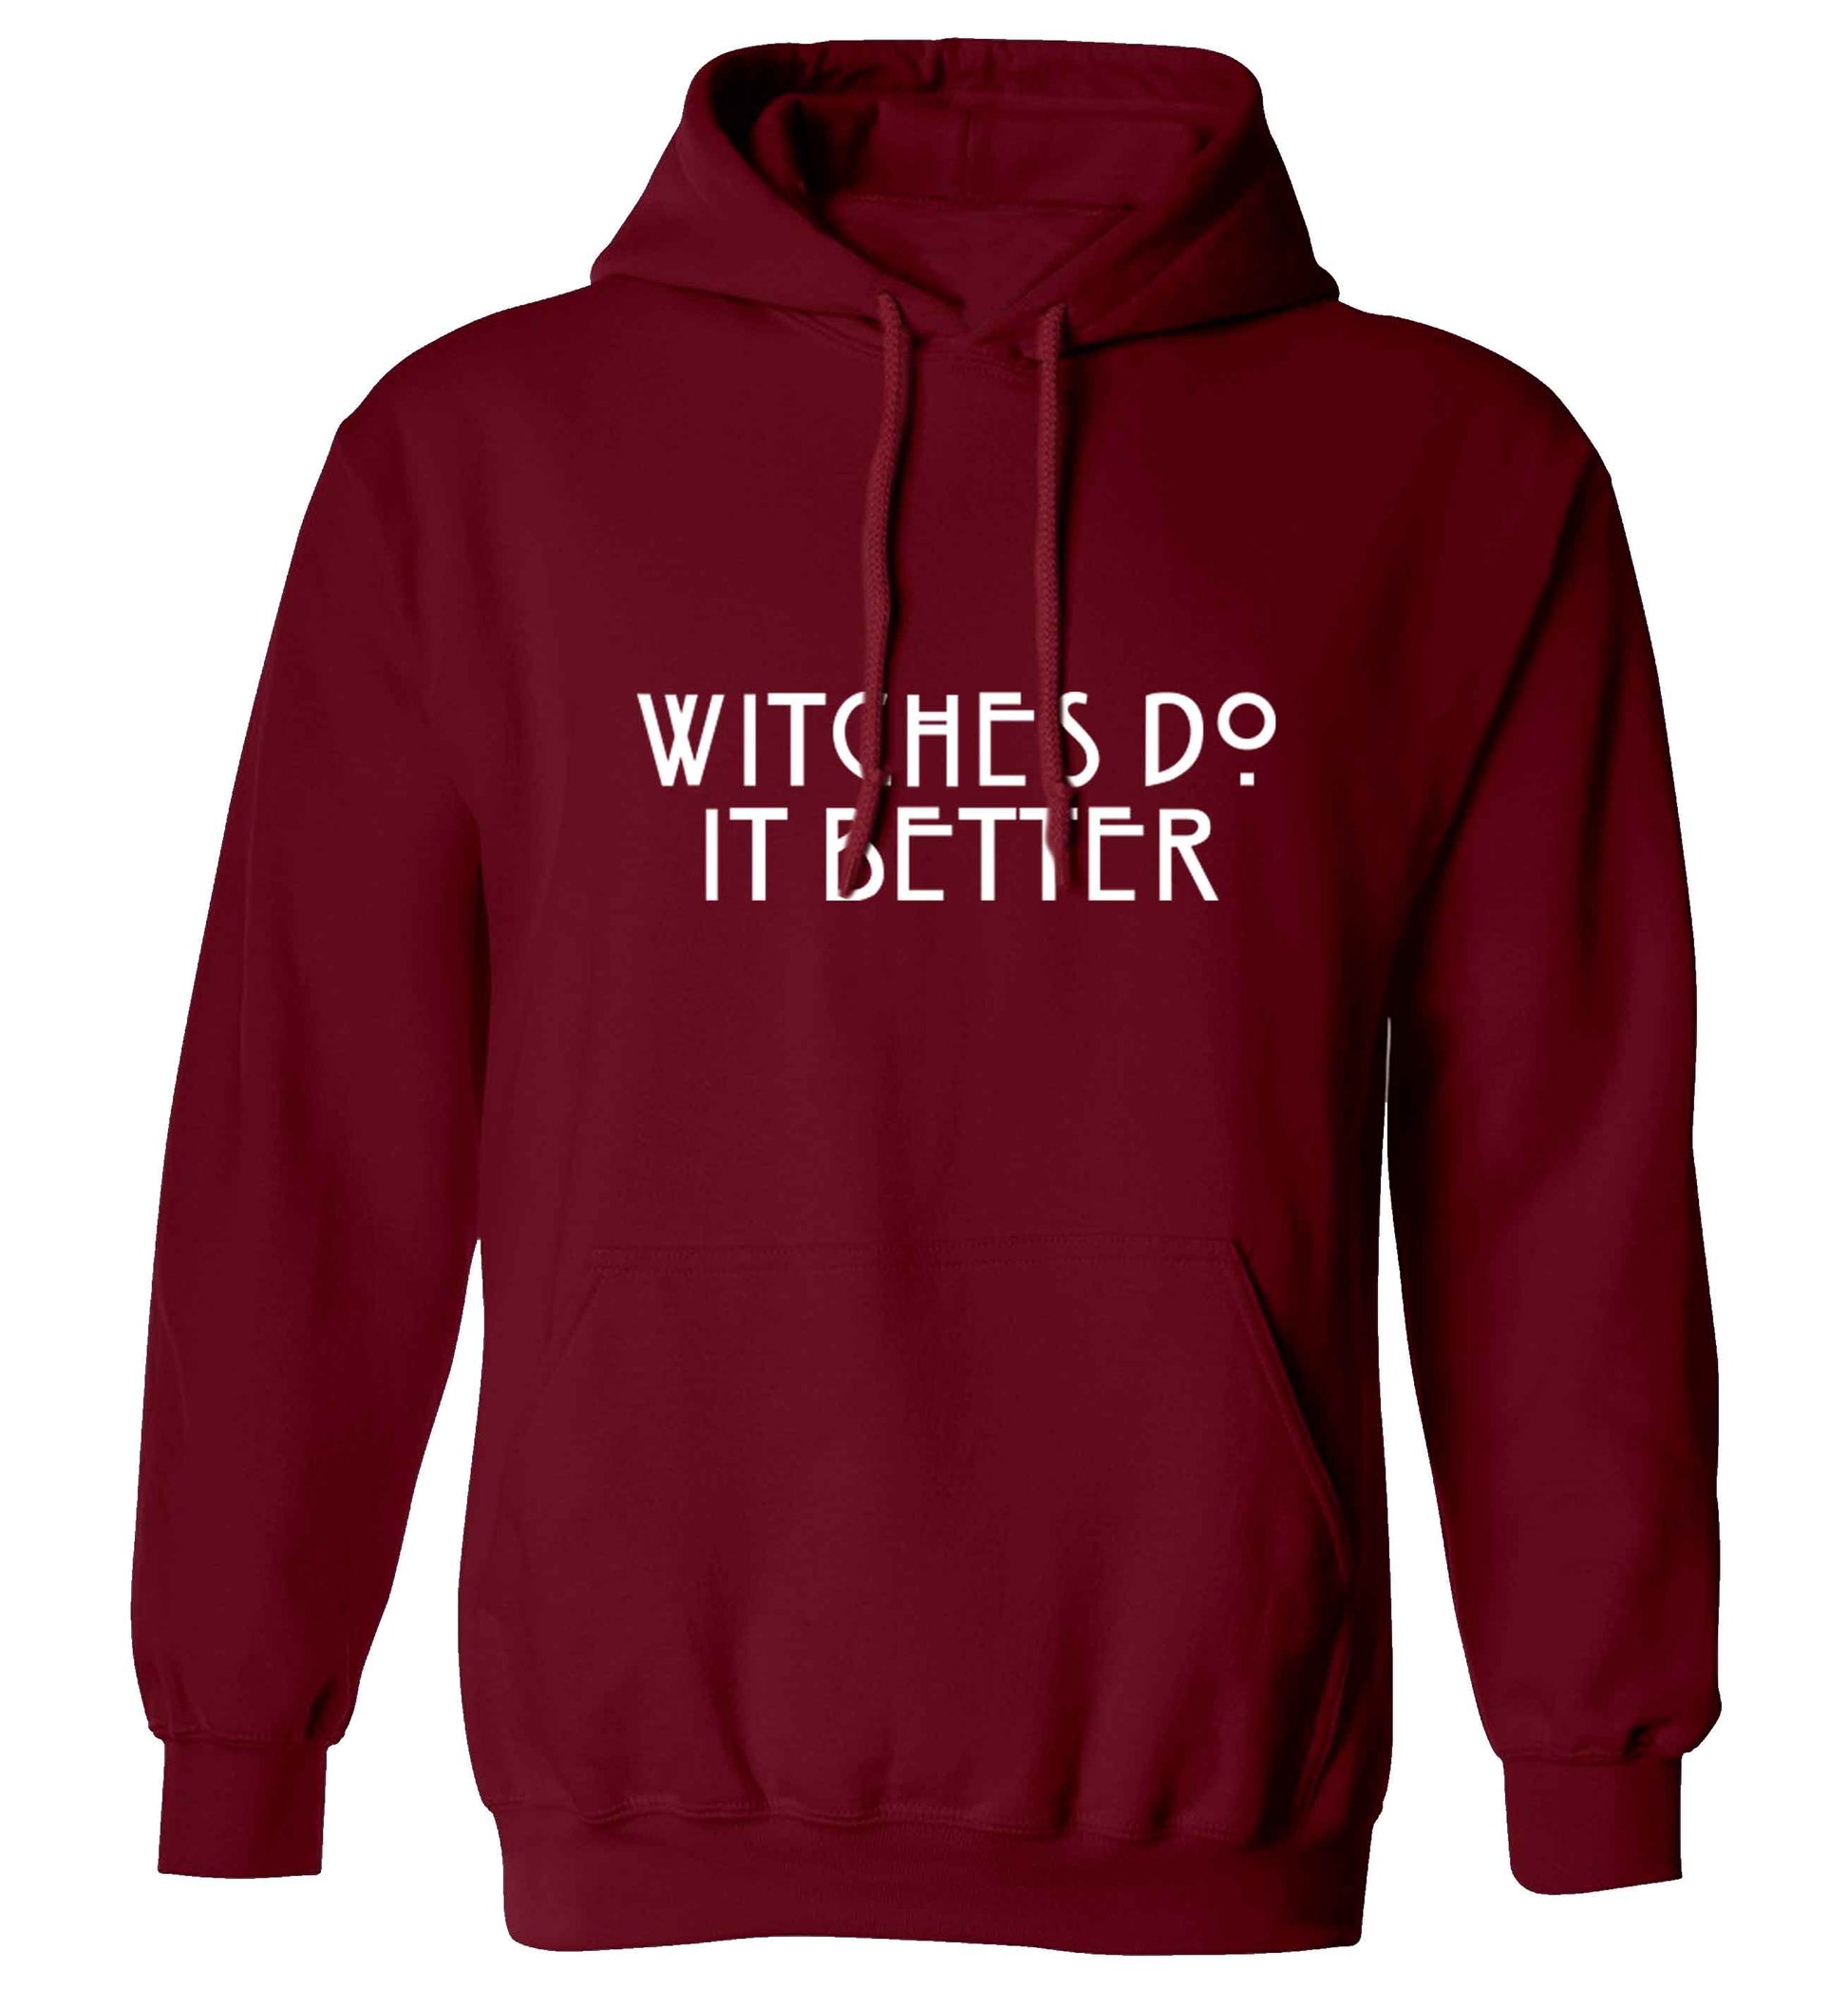 Witches do it better adults unisex maroon hoodie 2XL